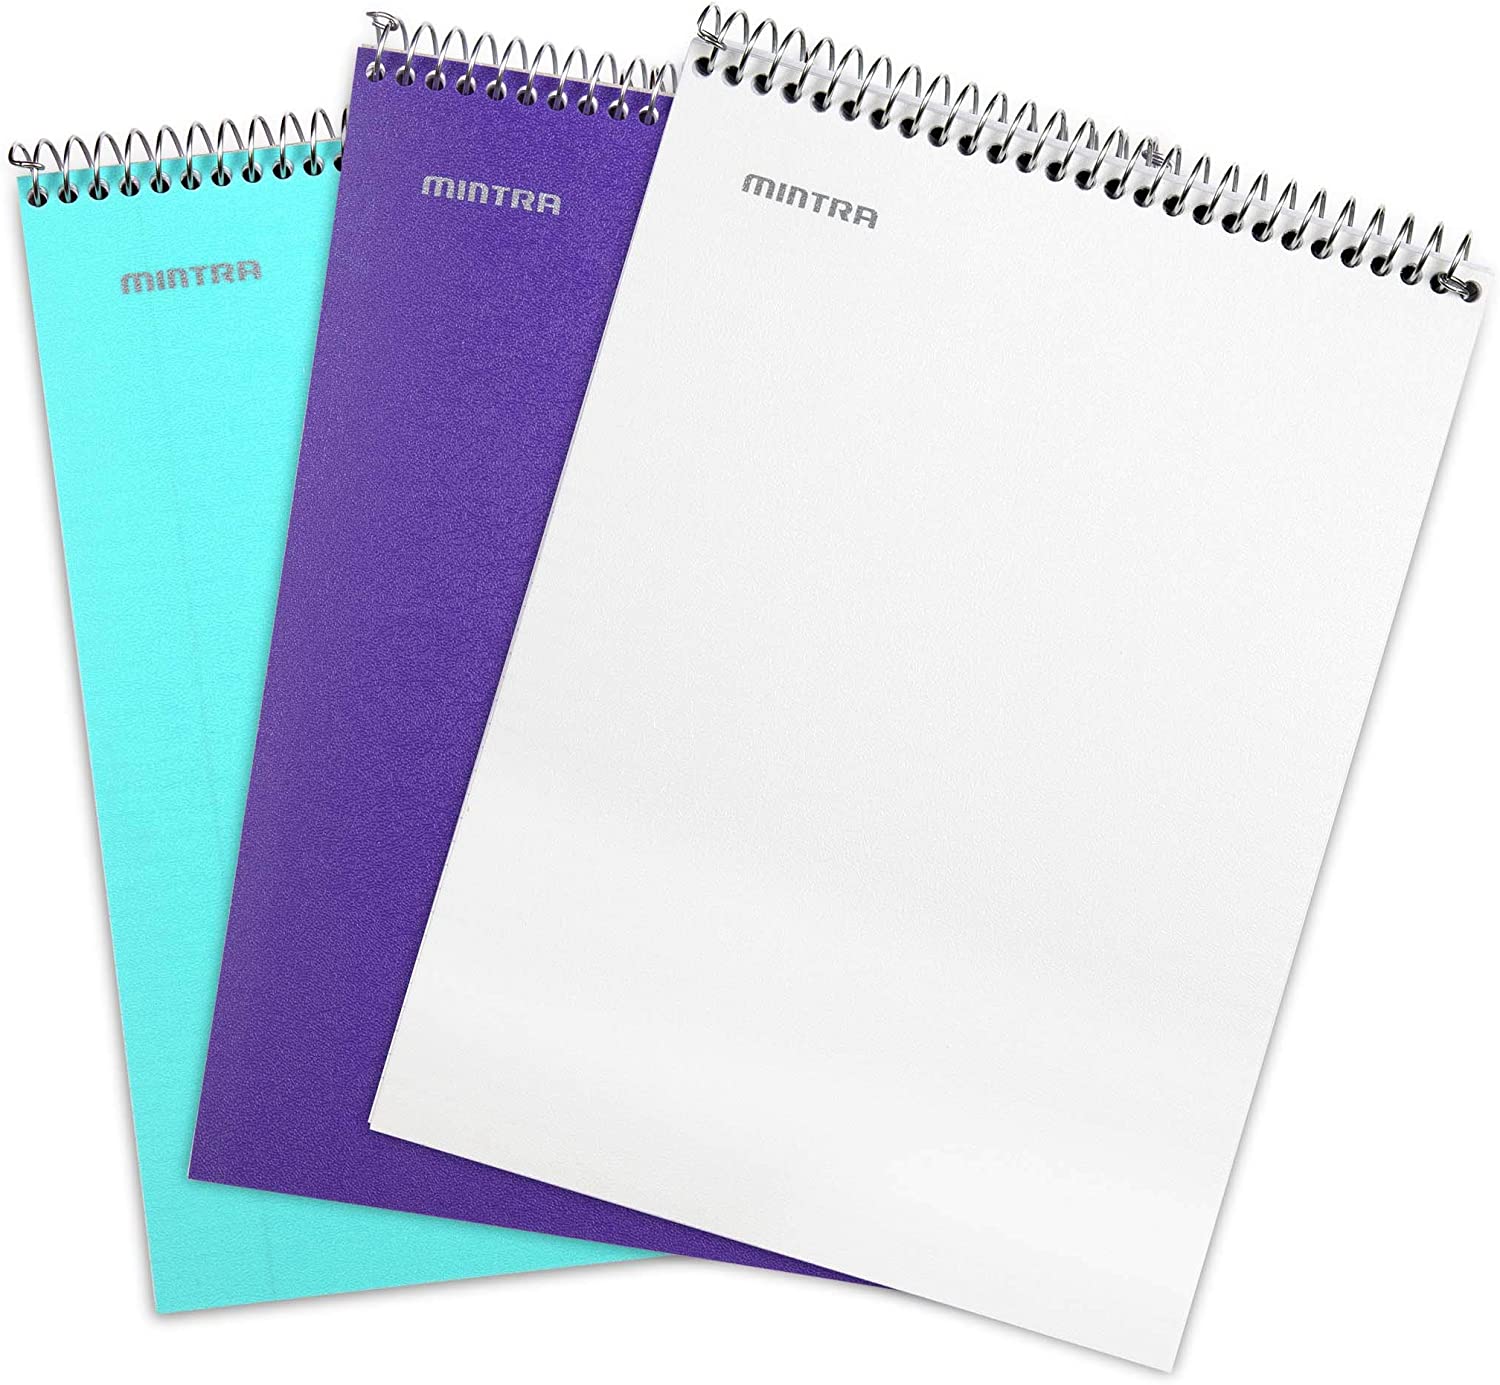 - Narrow Ruled Paper College Office 6 x 9 Mintra Office Steno Books - 100 sheets for Writing Notes in School Pastel 8PK - Lavender, Sage, Salmon, Spring Pink Work University 